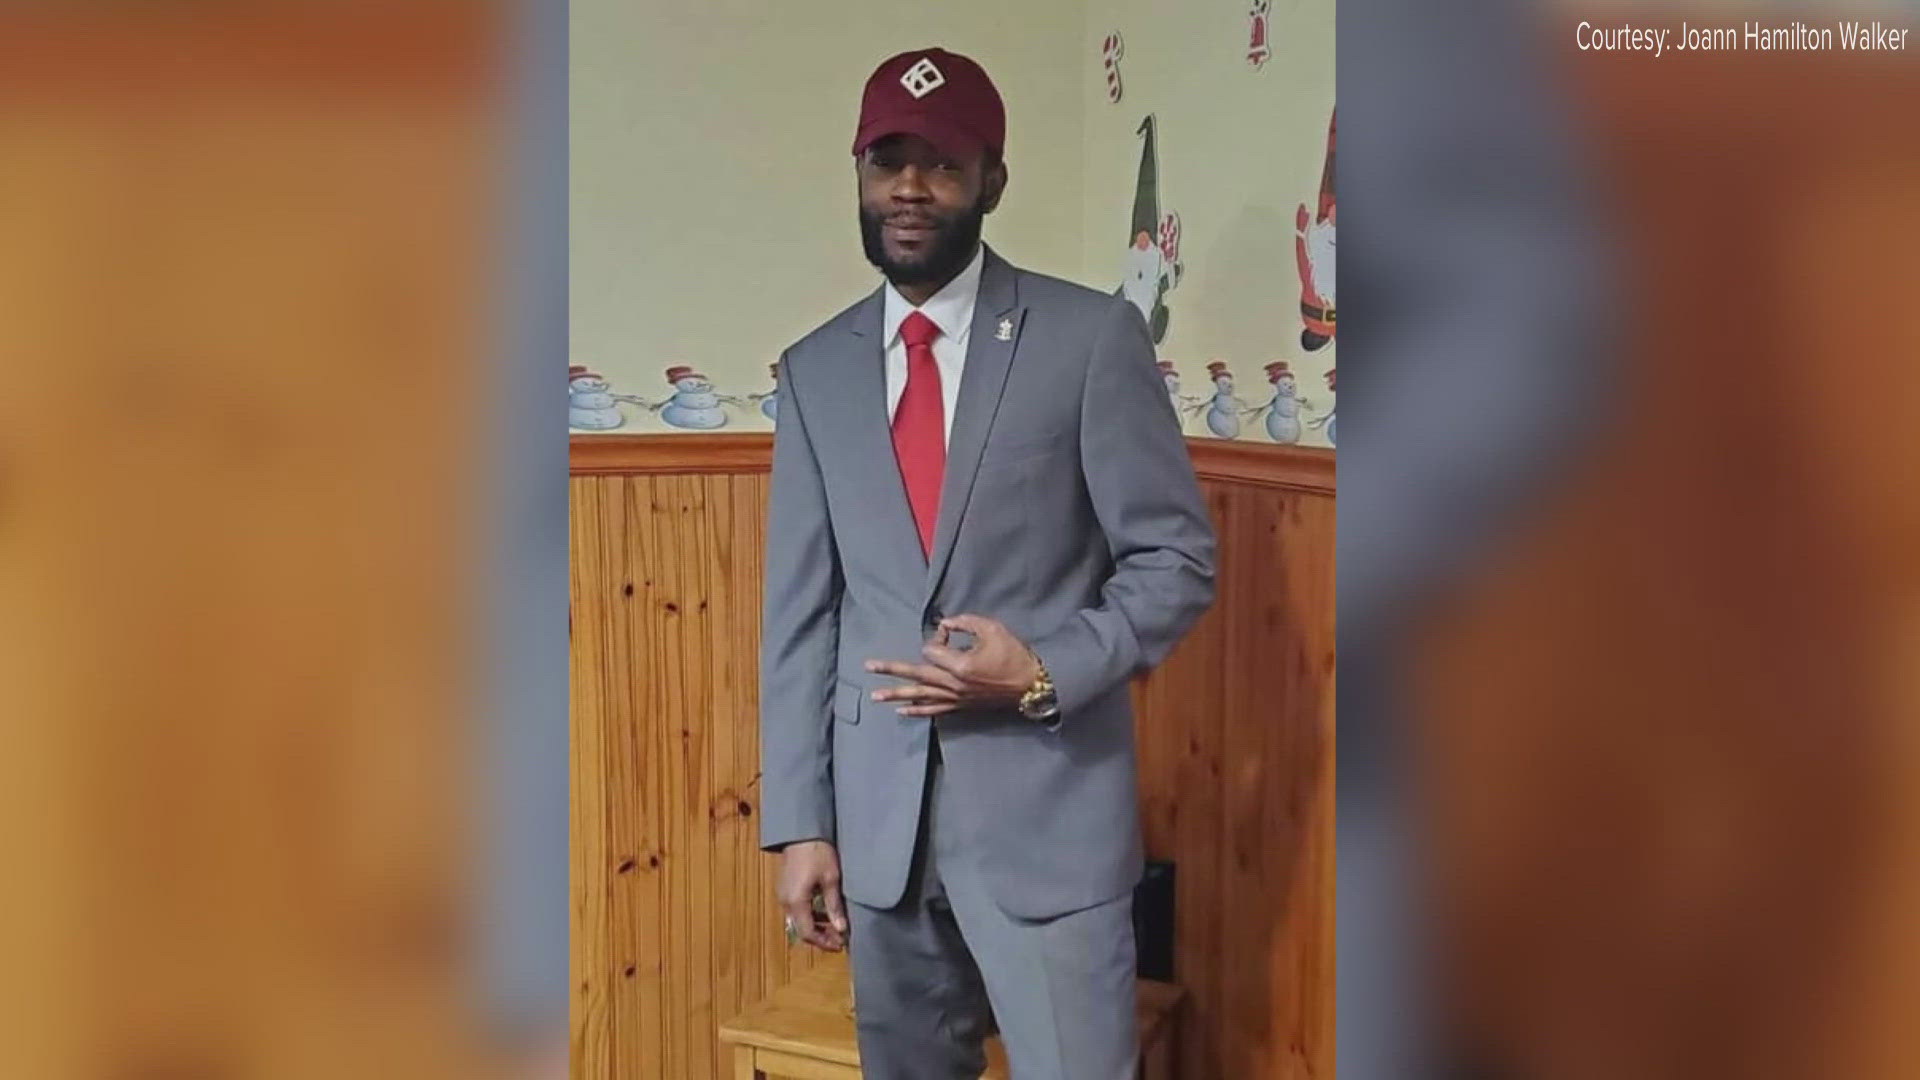 Byron Wesley Walker, 41, was found with "multiple gunshot wounds" on Maidstone Cove Drive May 23. Crime Stoppers is offering a reward of $20,000.